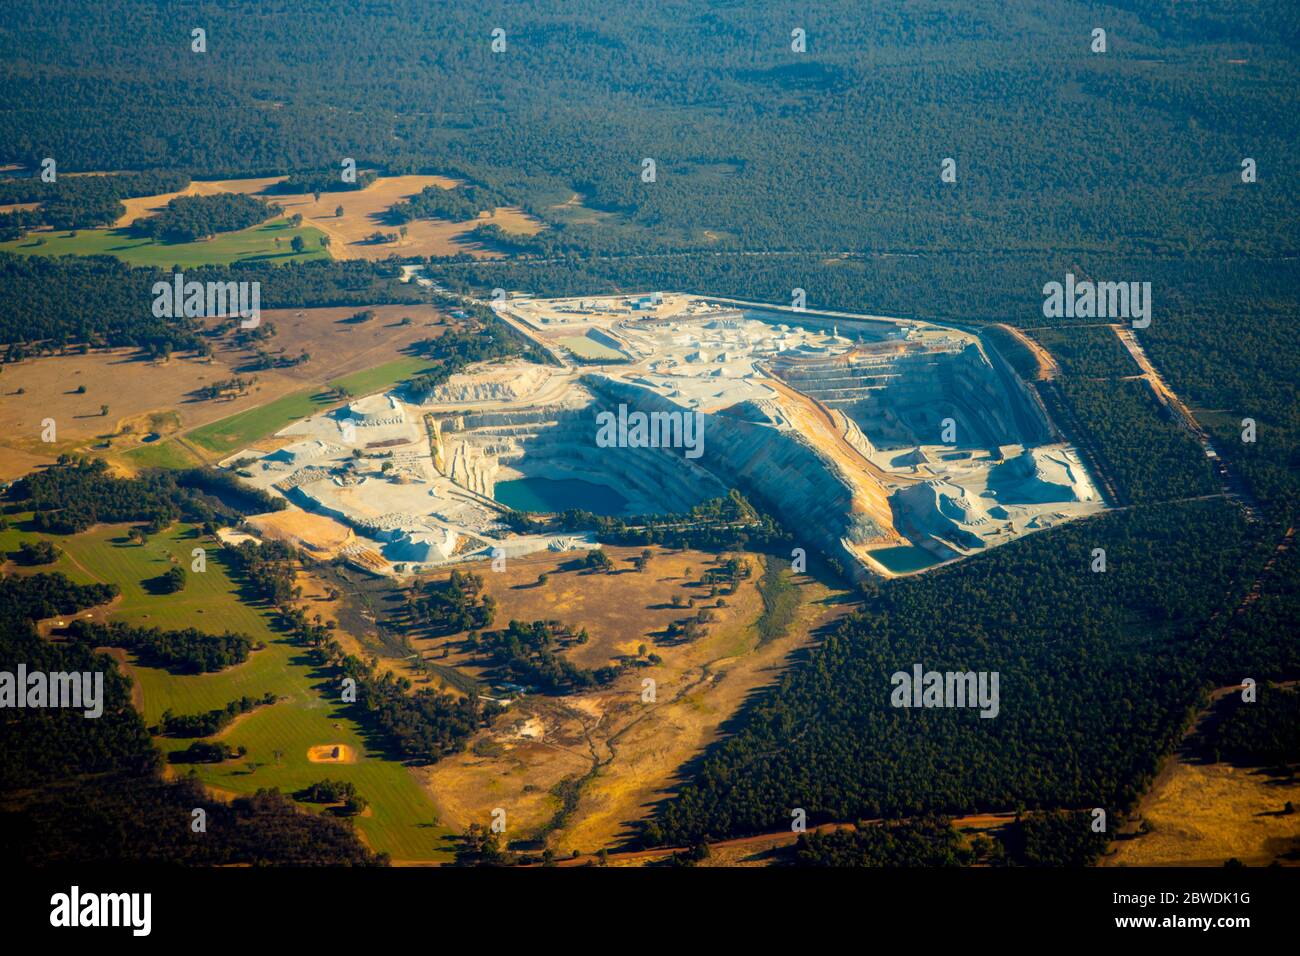 Stone Quarry for Construction Material Stock Photo